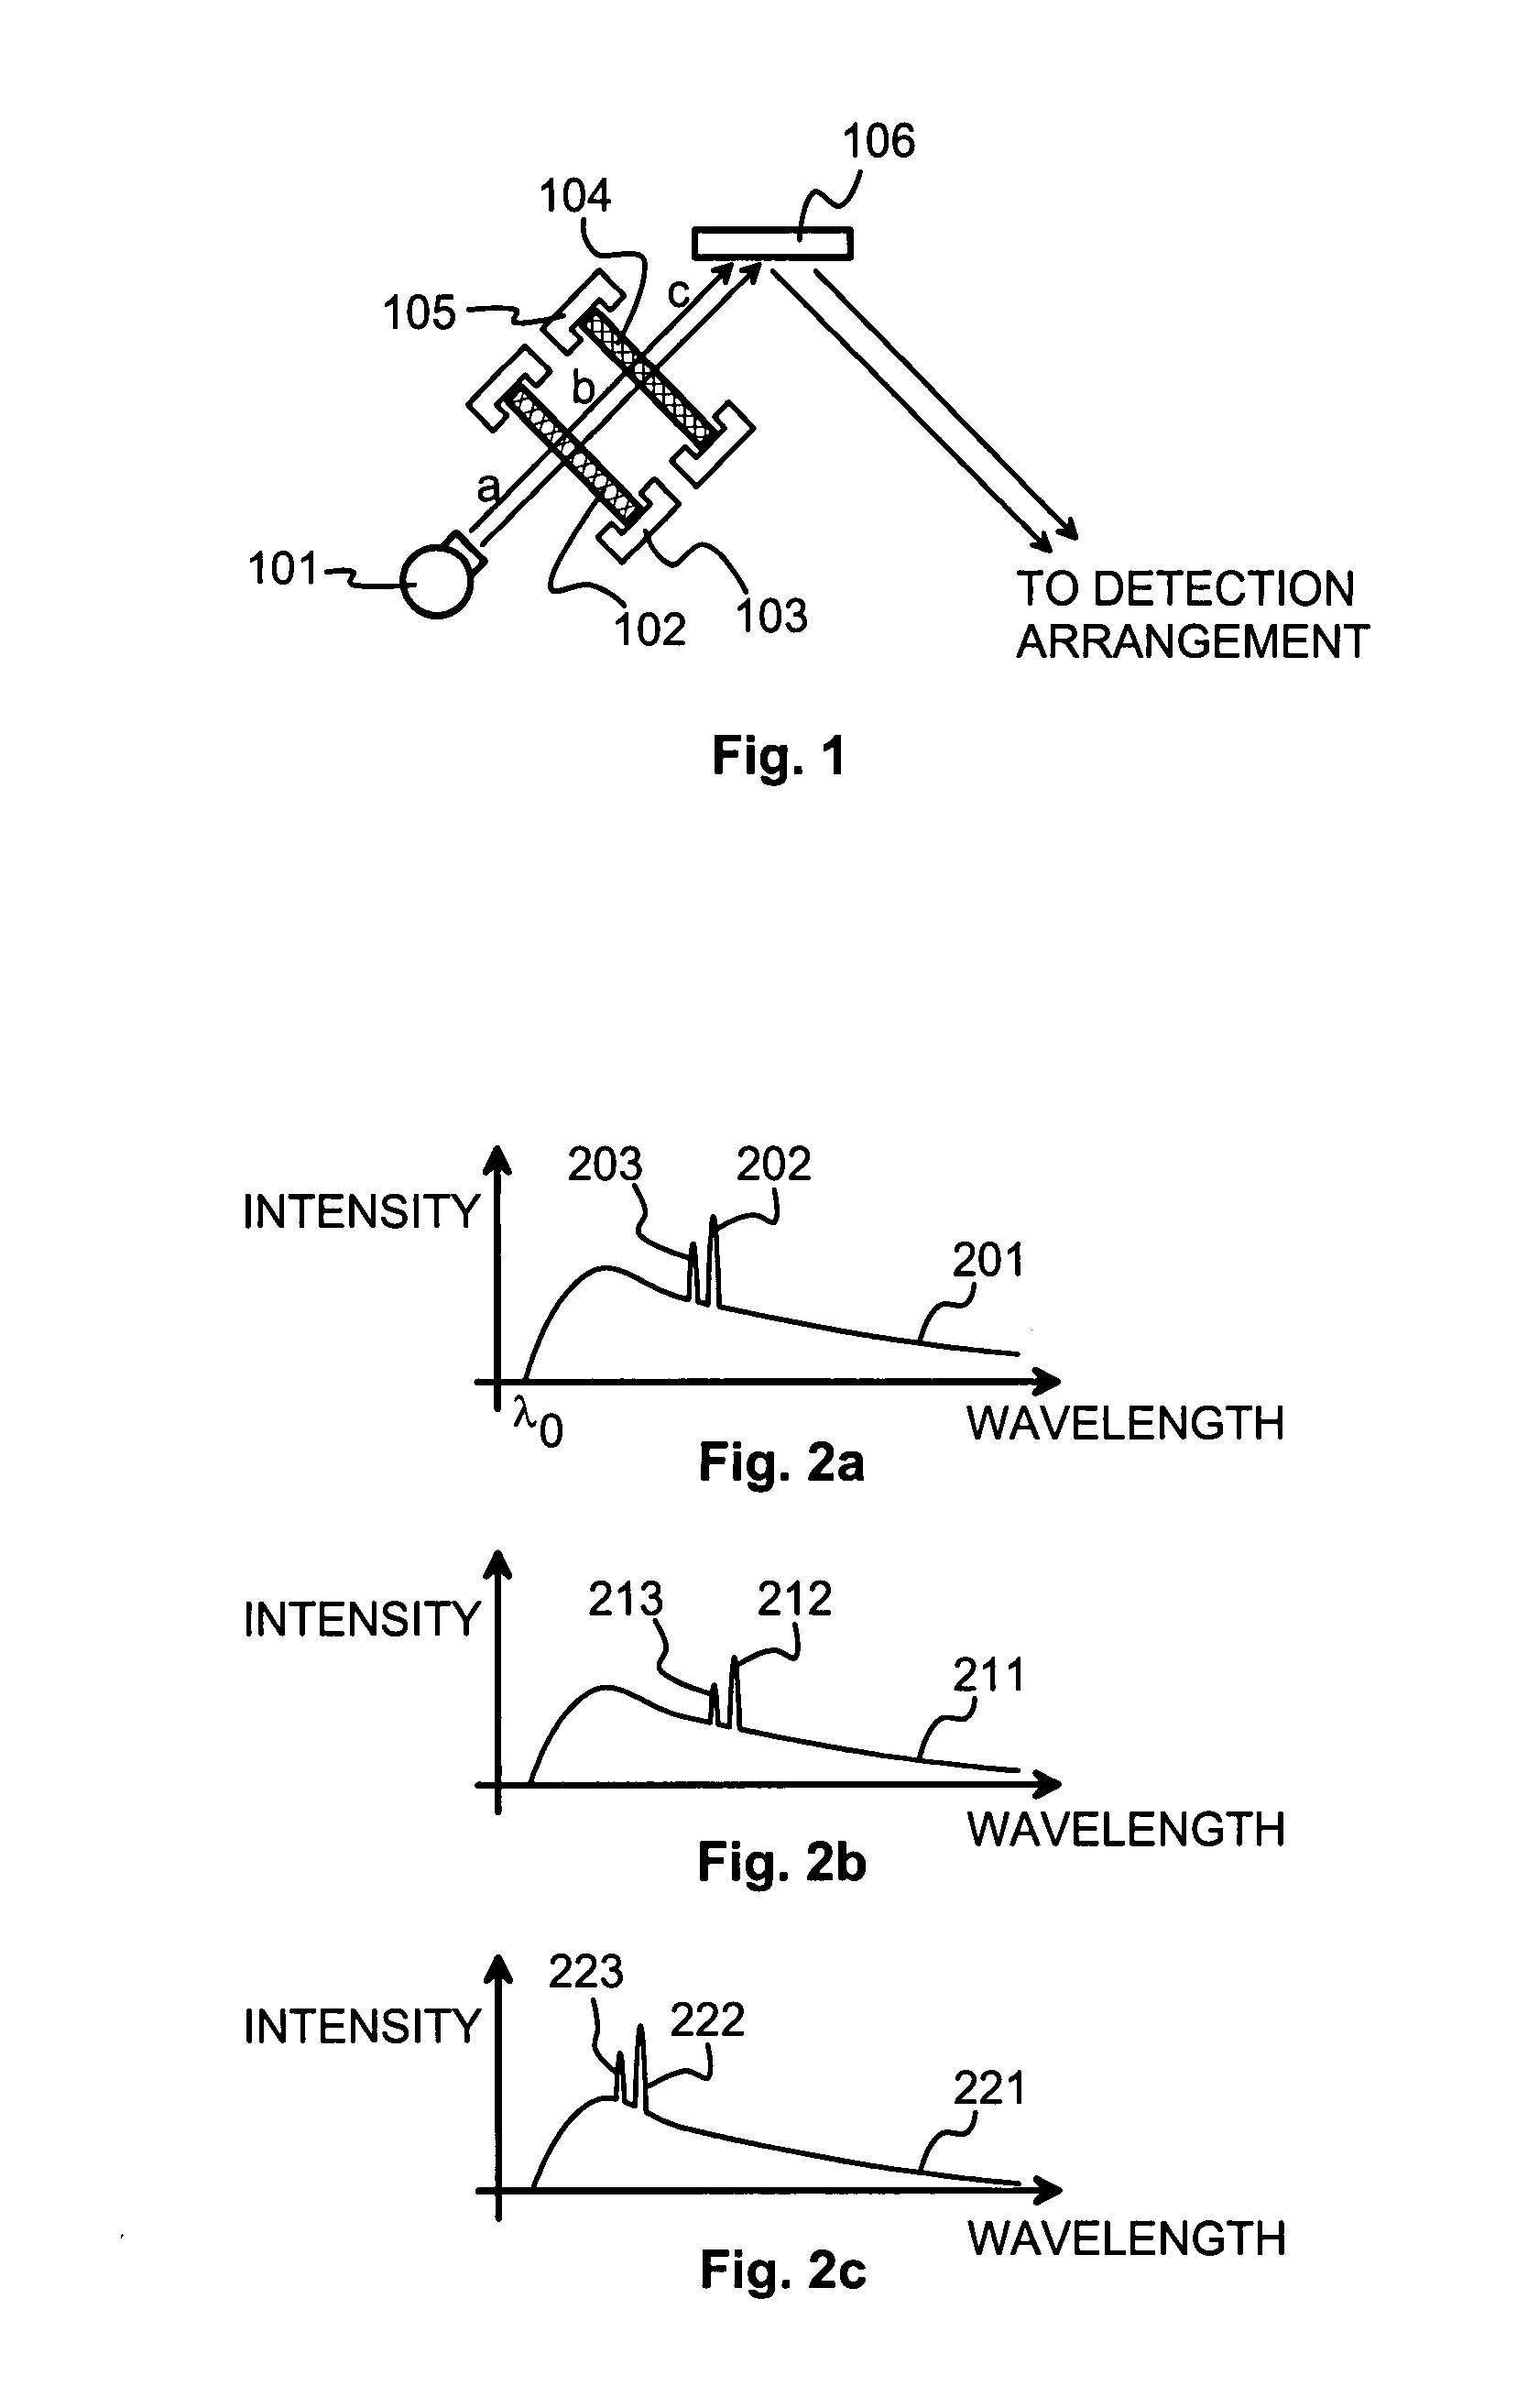 Filter for x-ray radiation, and an arrangement for using filtered x-ray radiation for excitation